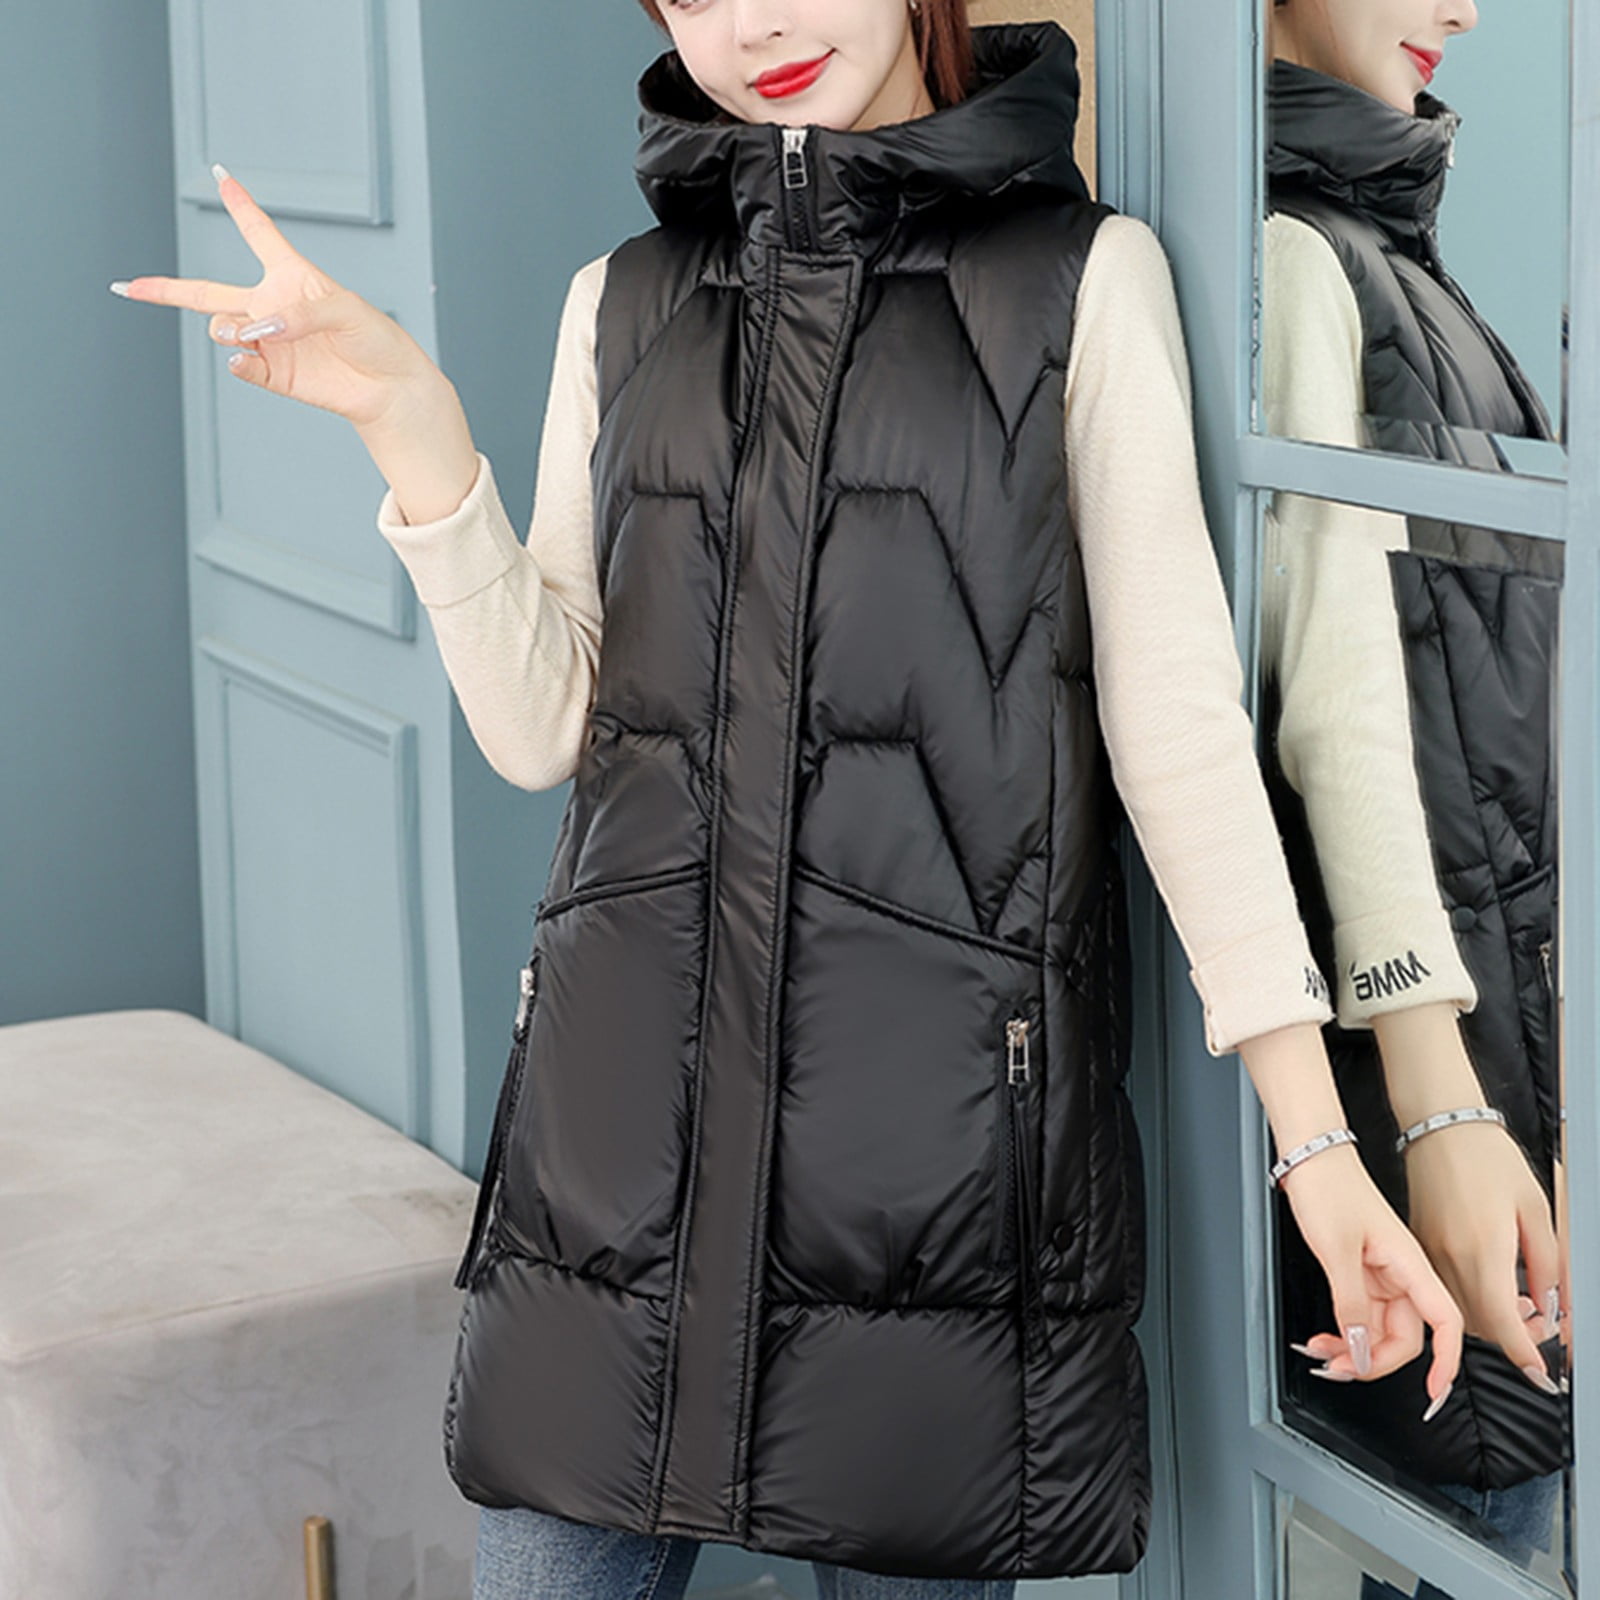 CAICJ98 Womens Vests Outerwear Women's Lightweight Zip Up Hooded Vest  Fashion Sleeveless Quilted jacket With Pockets Black,L 